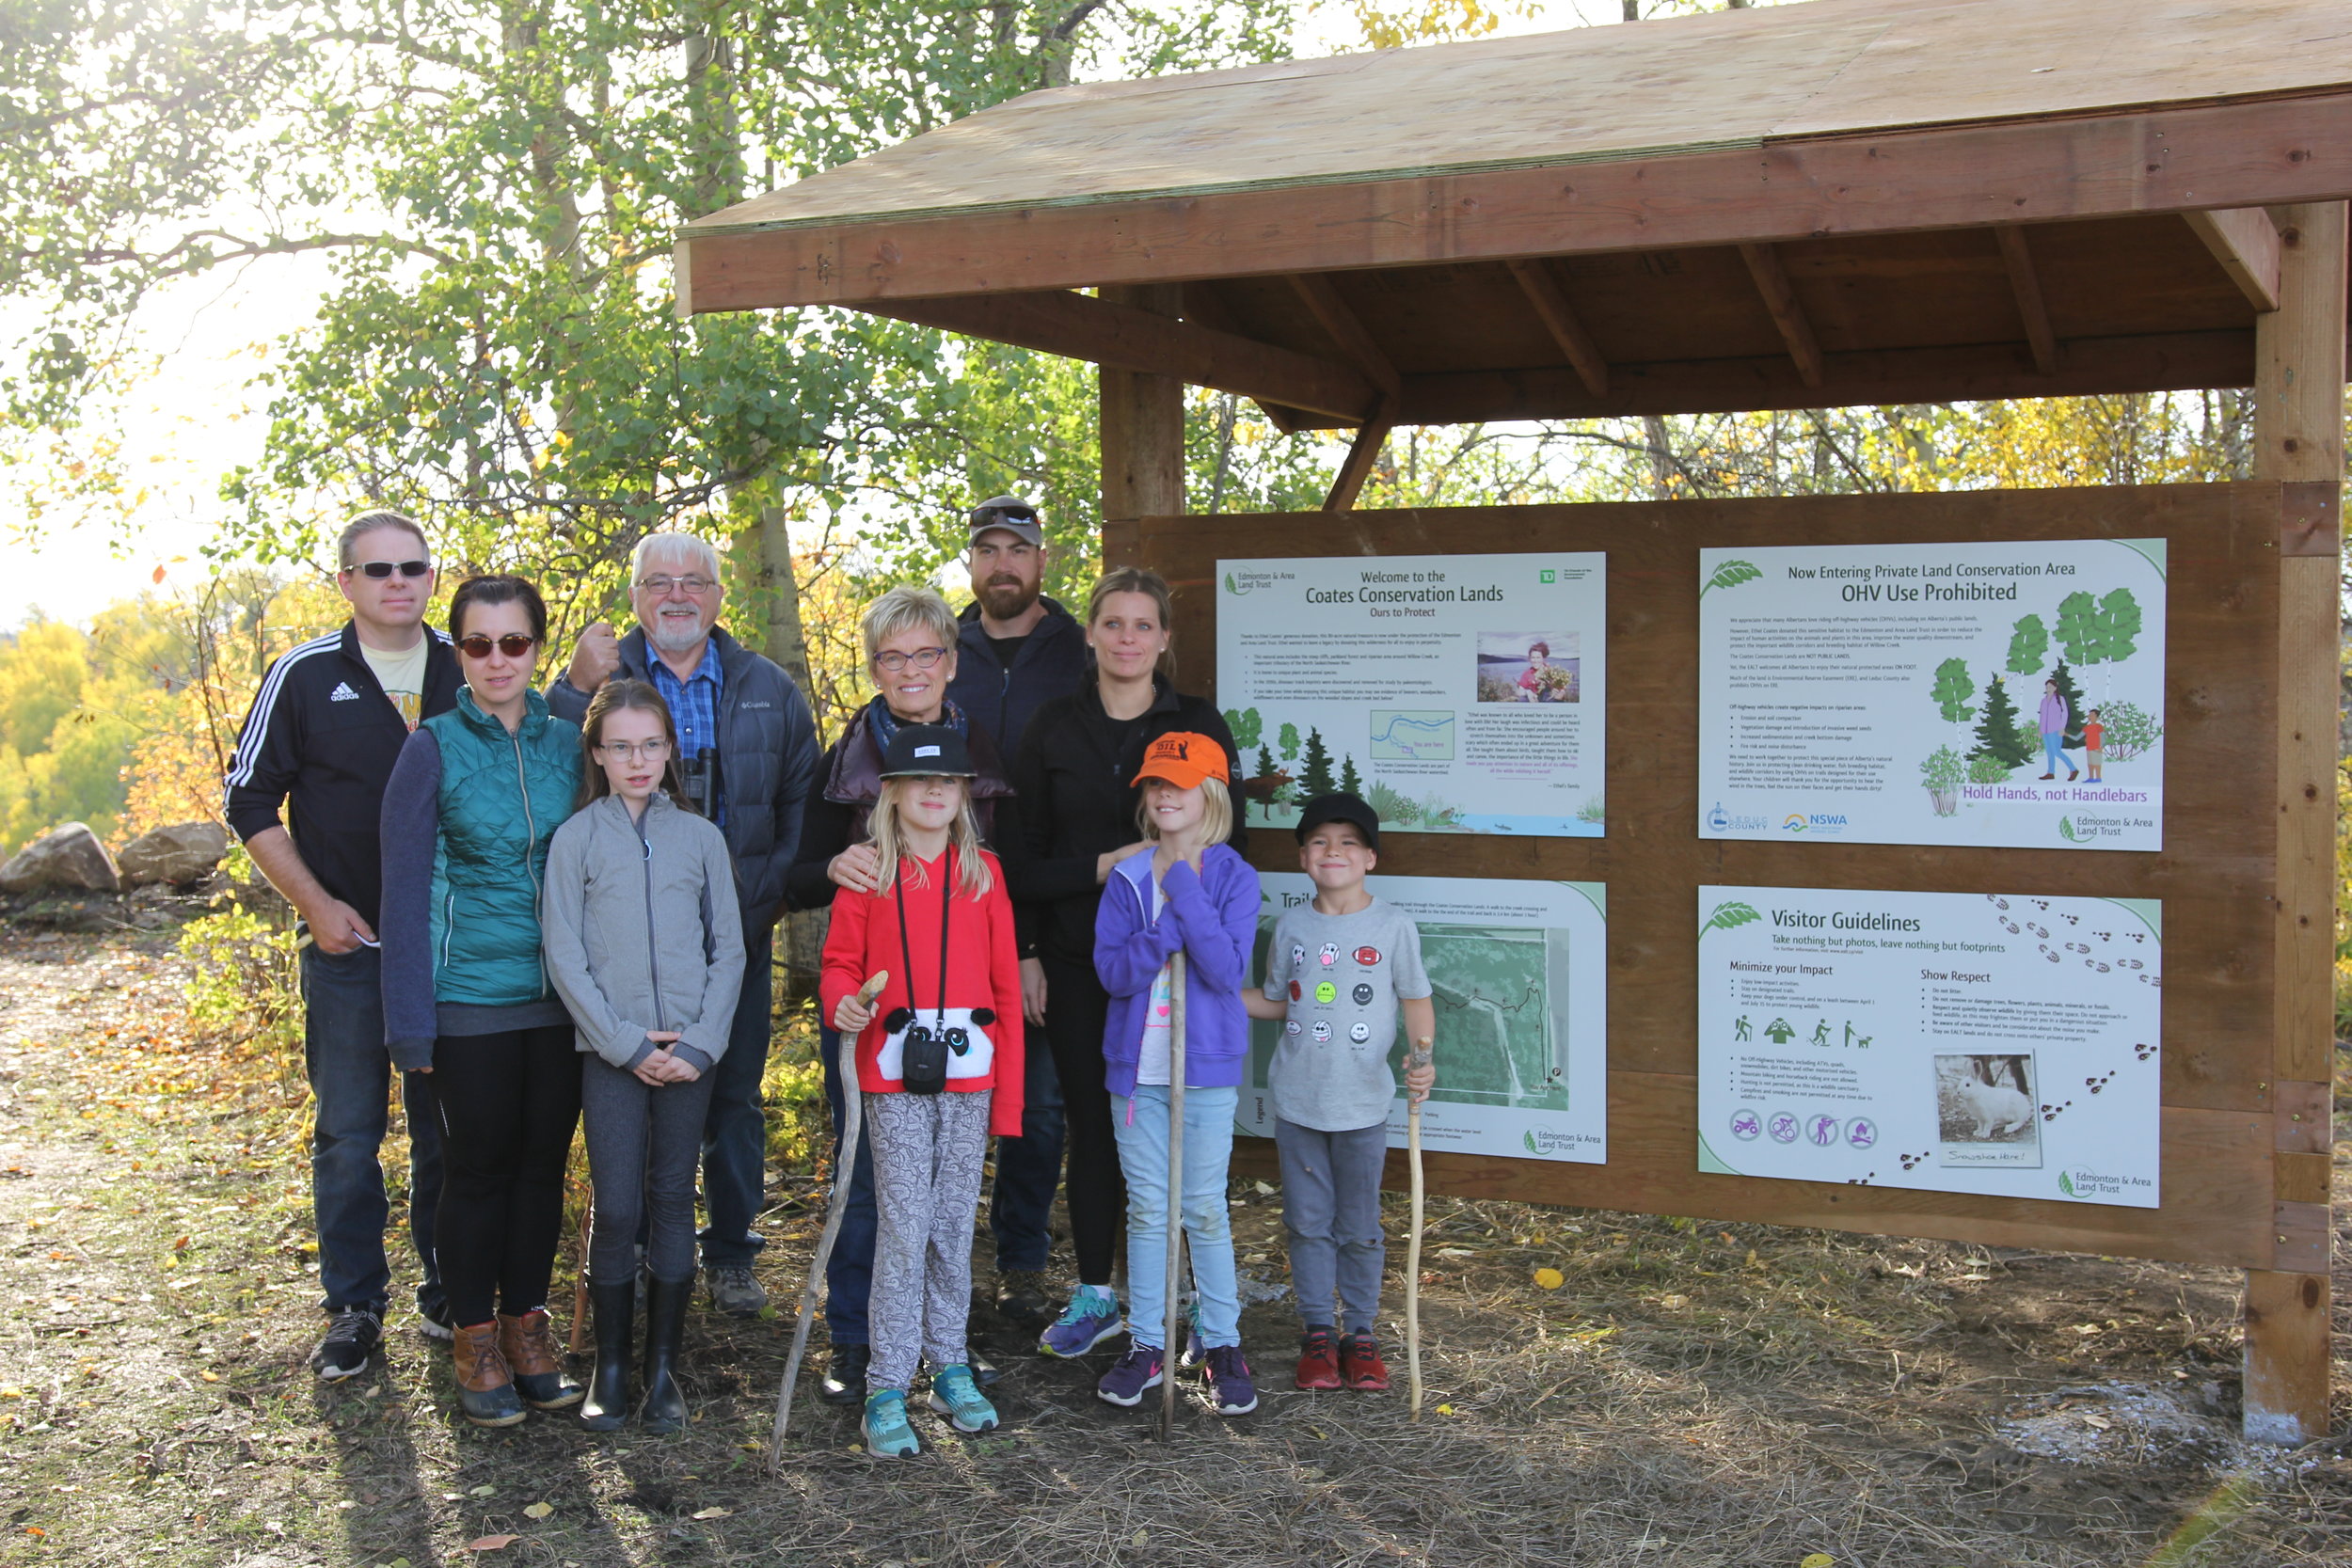 The family of Ethel Coates joined us for the Grand Opening of Coates Conservation Lands